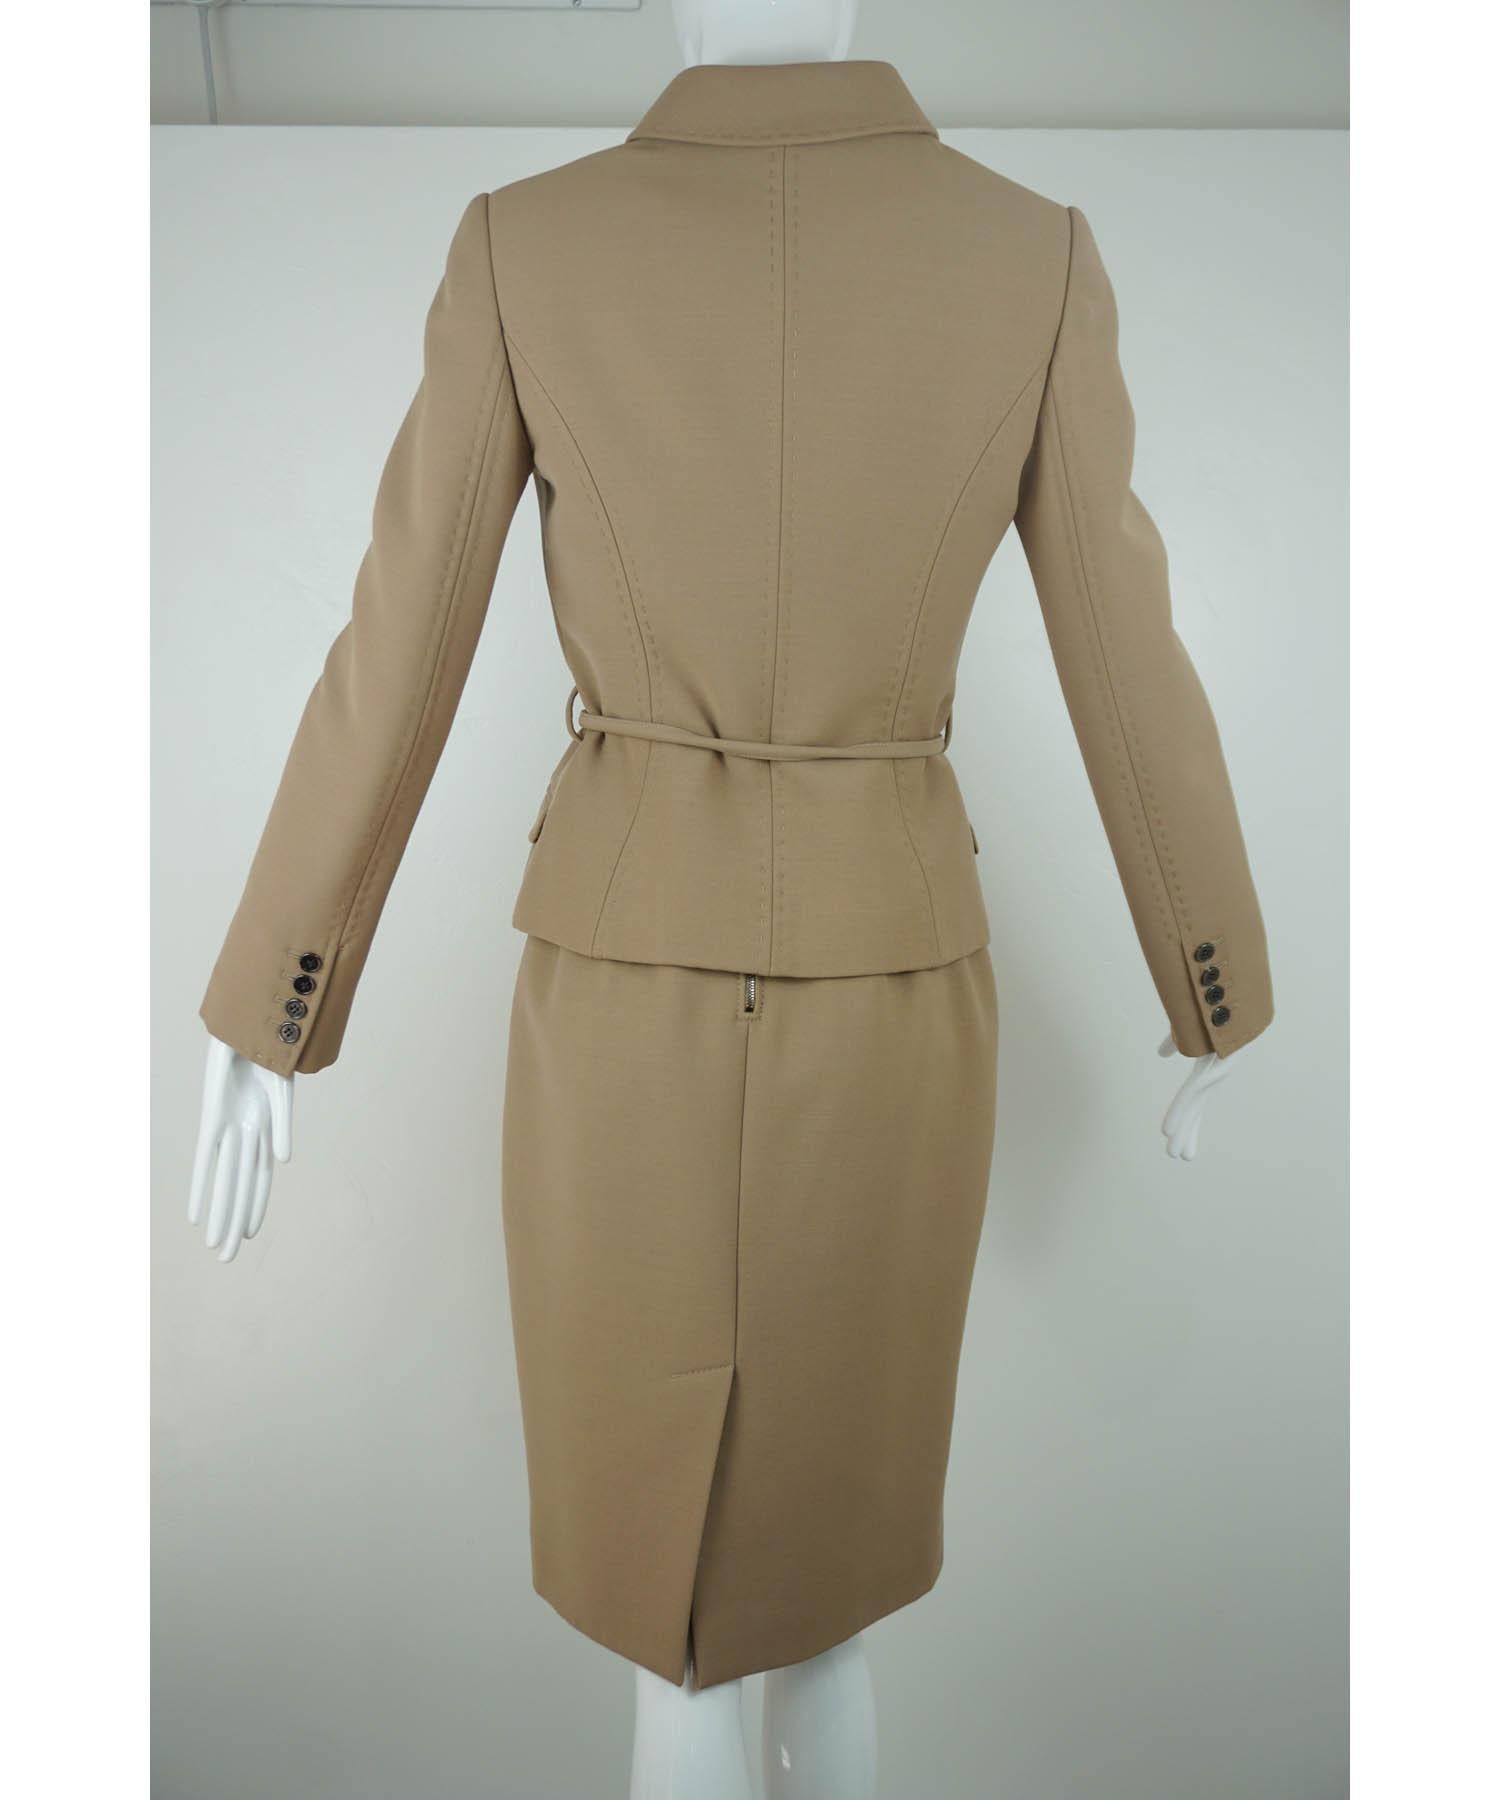 Dolce & Gabbana Dress and Belted Jacket Sz 42/6 For Sale 2